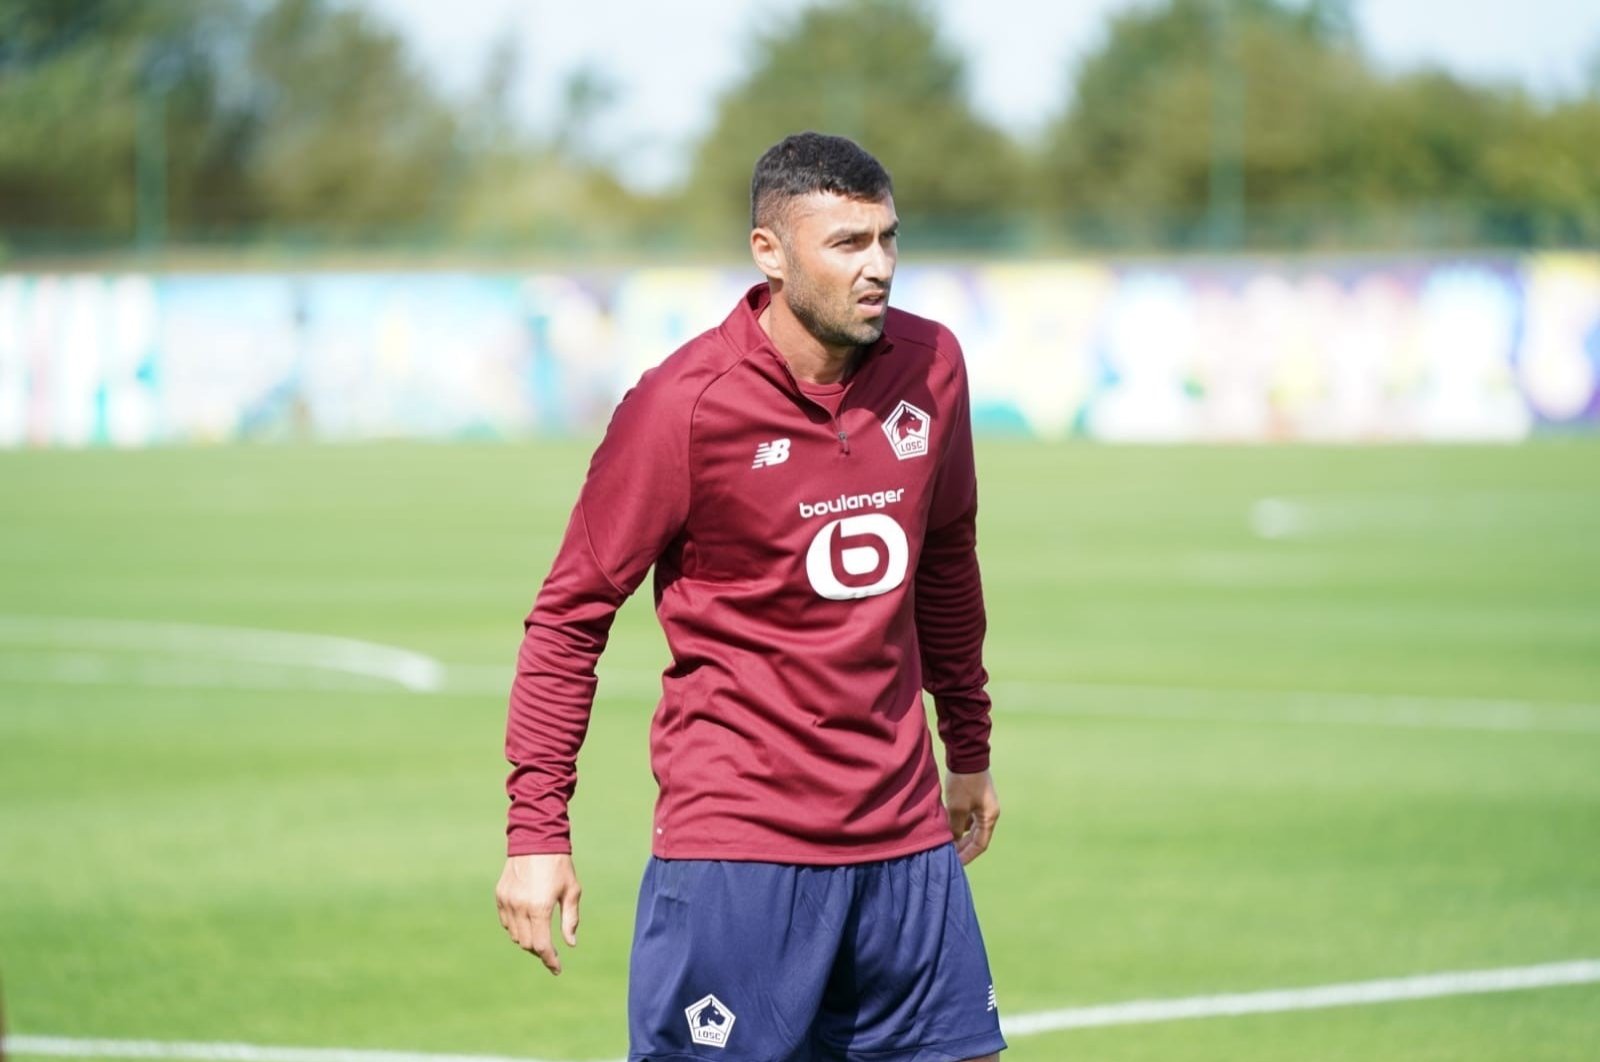 Turkish forward Burak Yılmaz trains with LOSC Lille after signing with the Ligue 1 club in Lille, France, Aug. 1, 2020. (DHA Photo)